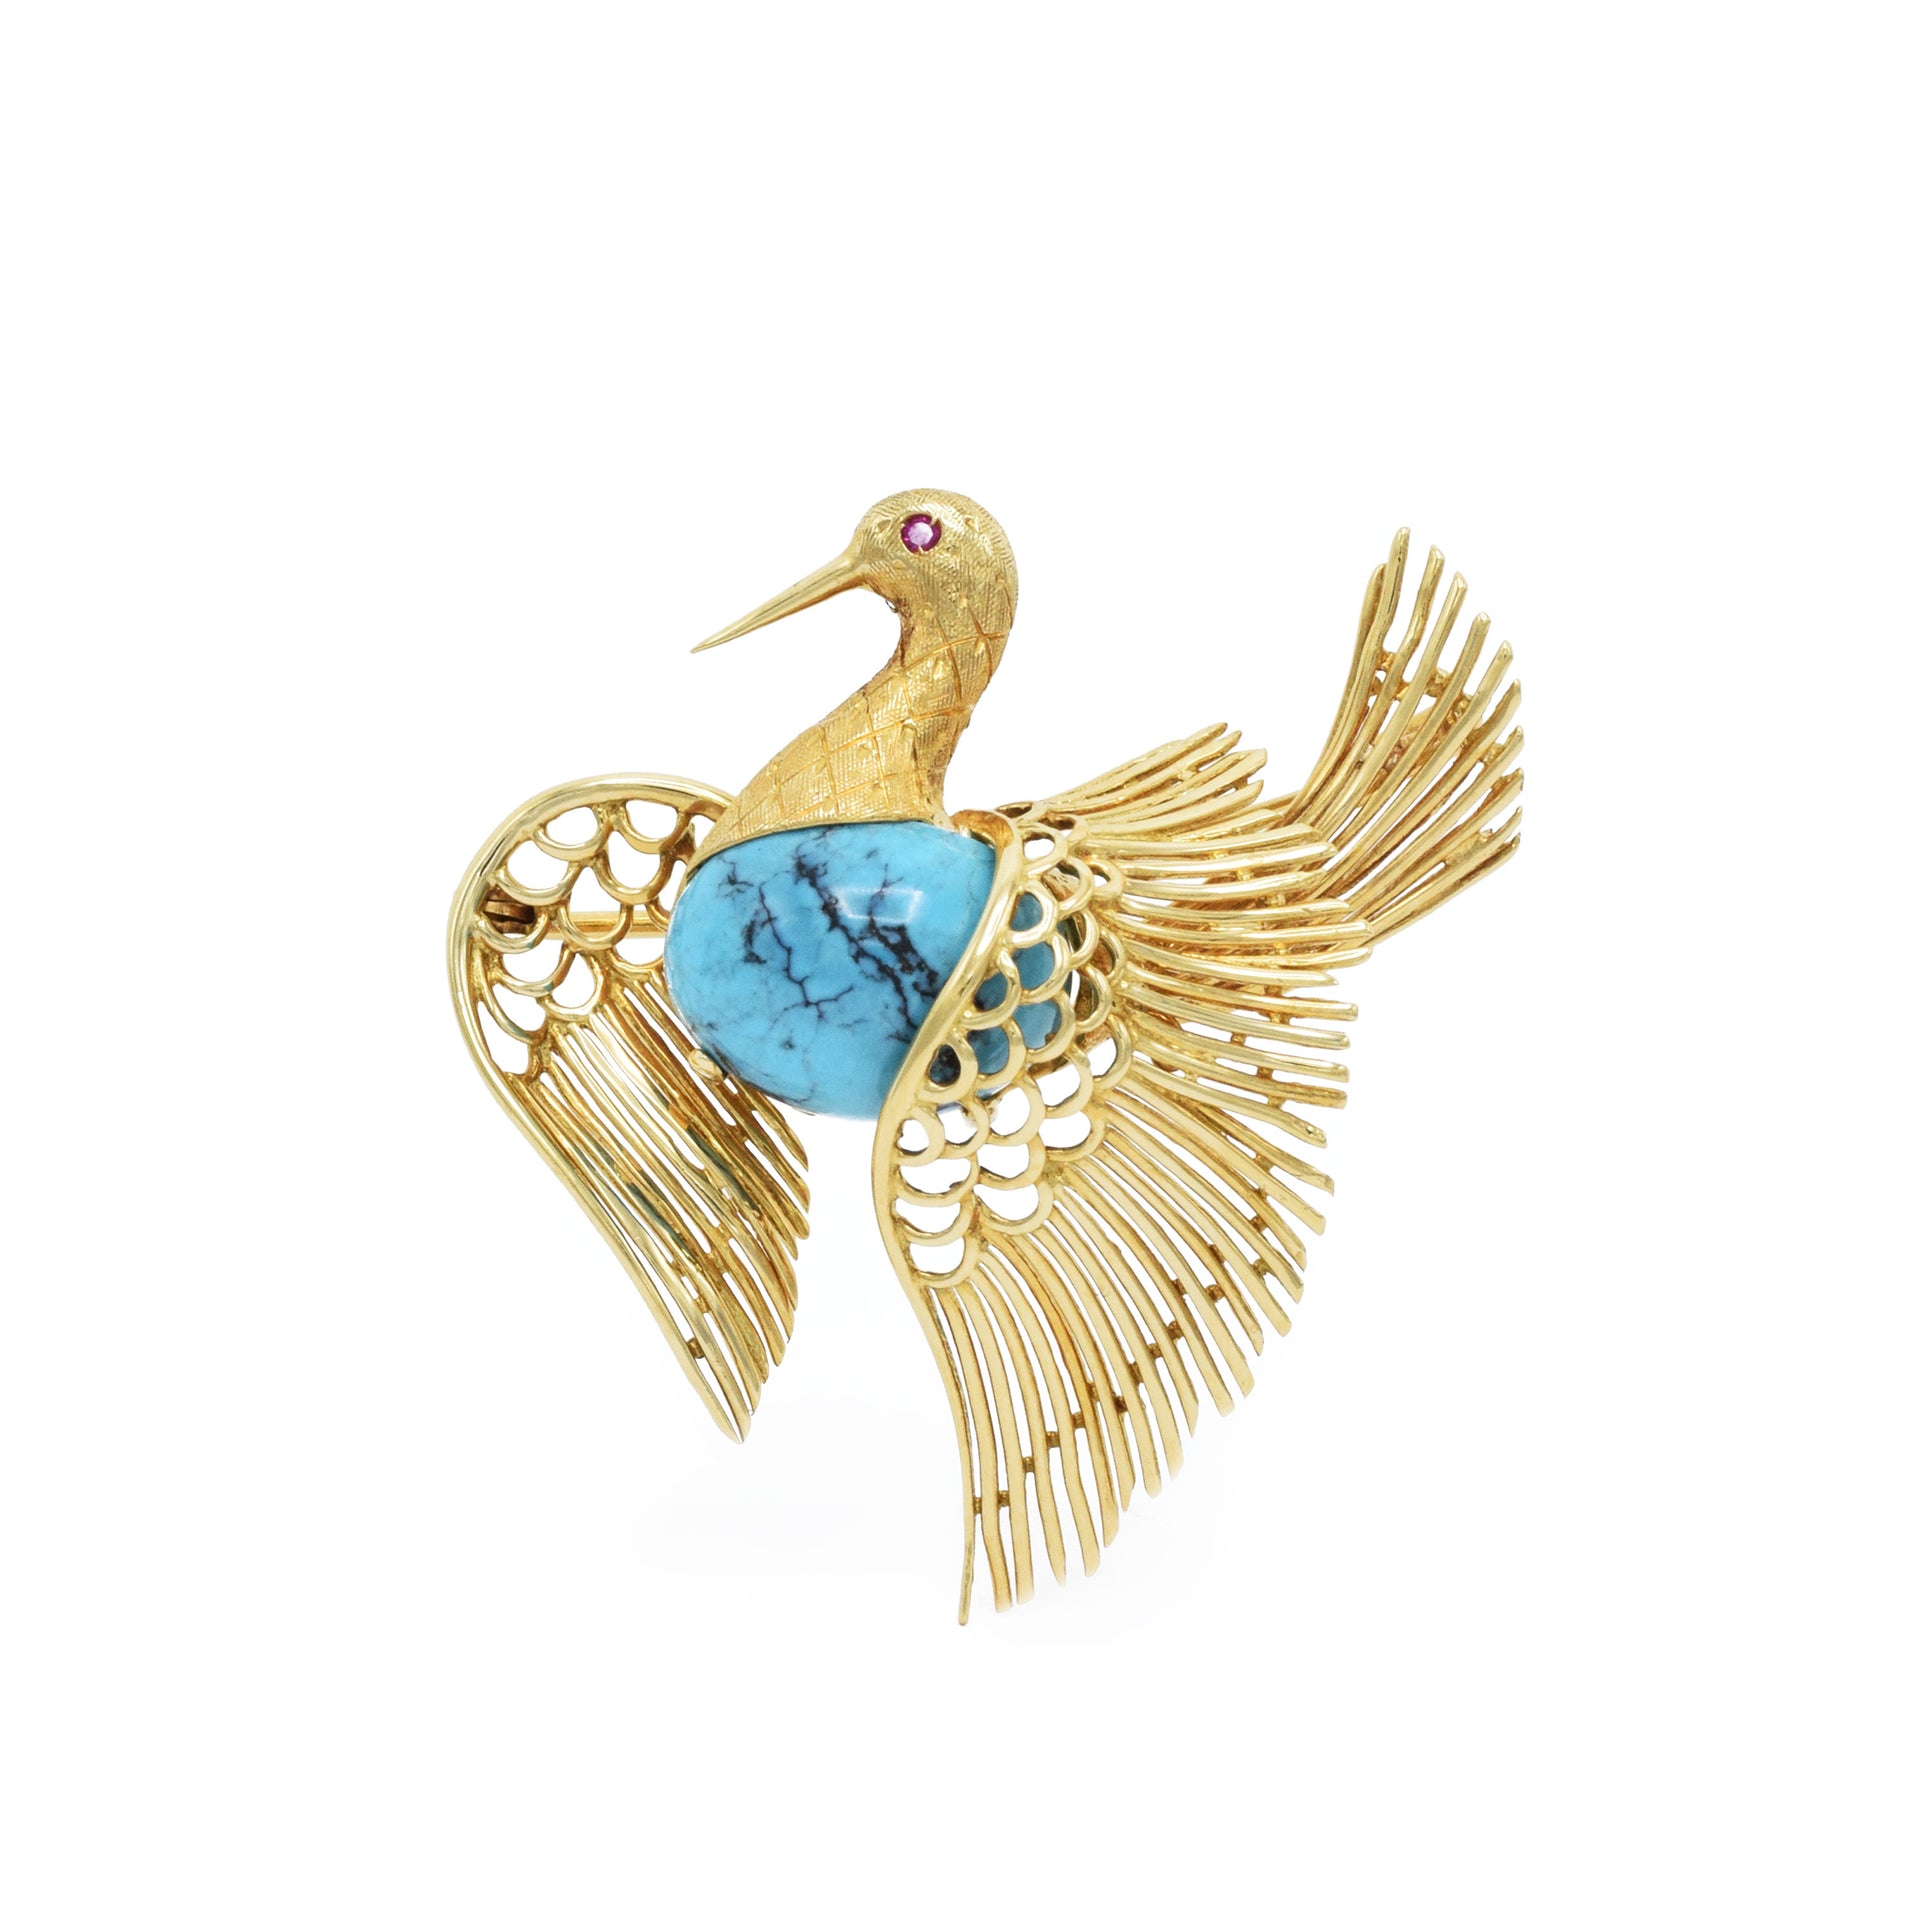 Vintage 'Cartier' Natural Turquoise Swan Pin